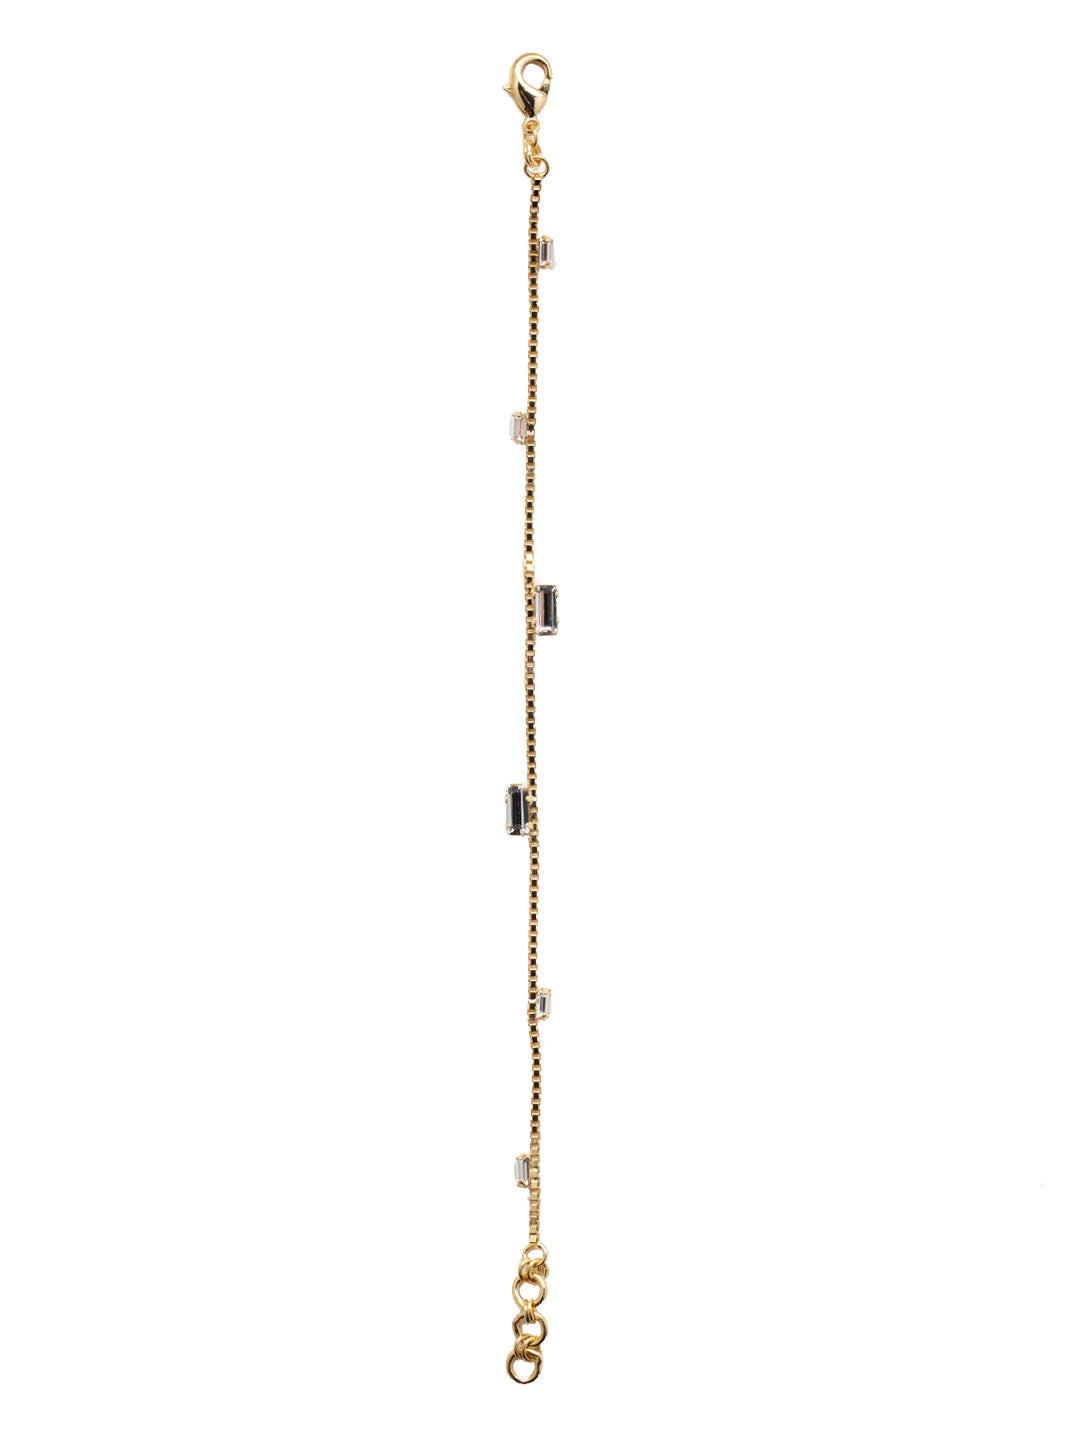 Janelle Tennis Bracelet - 4BEZ77BGCRY - <p>The Janelle Tennis Bracelet features a single delicate chain with emerald cut crystals on either side, and is secured with a lobster claw clasp. From Sorrelli's Crystal collection in our Bright Gold-tone finish.</p>